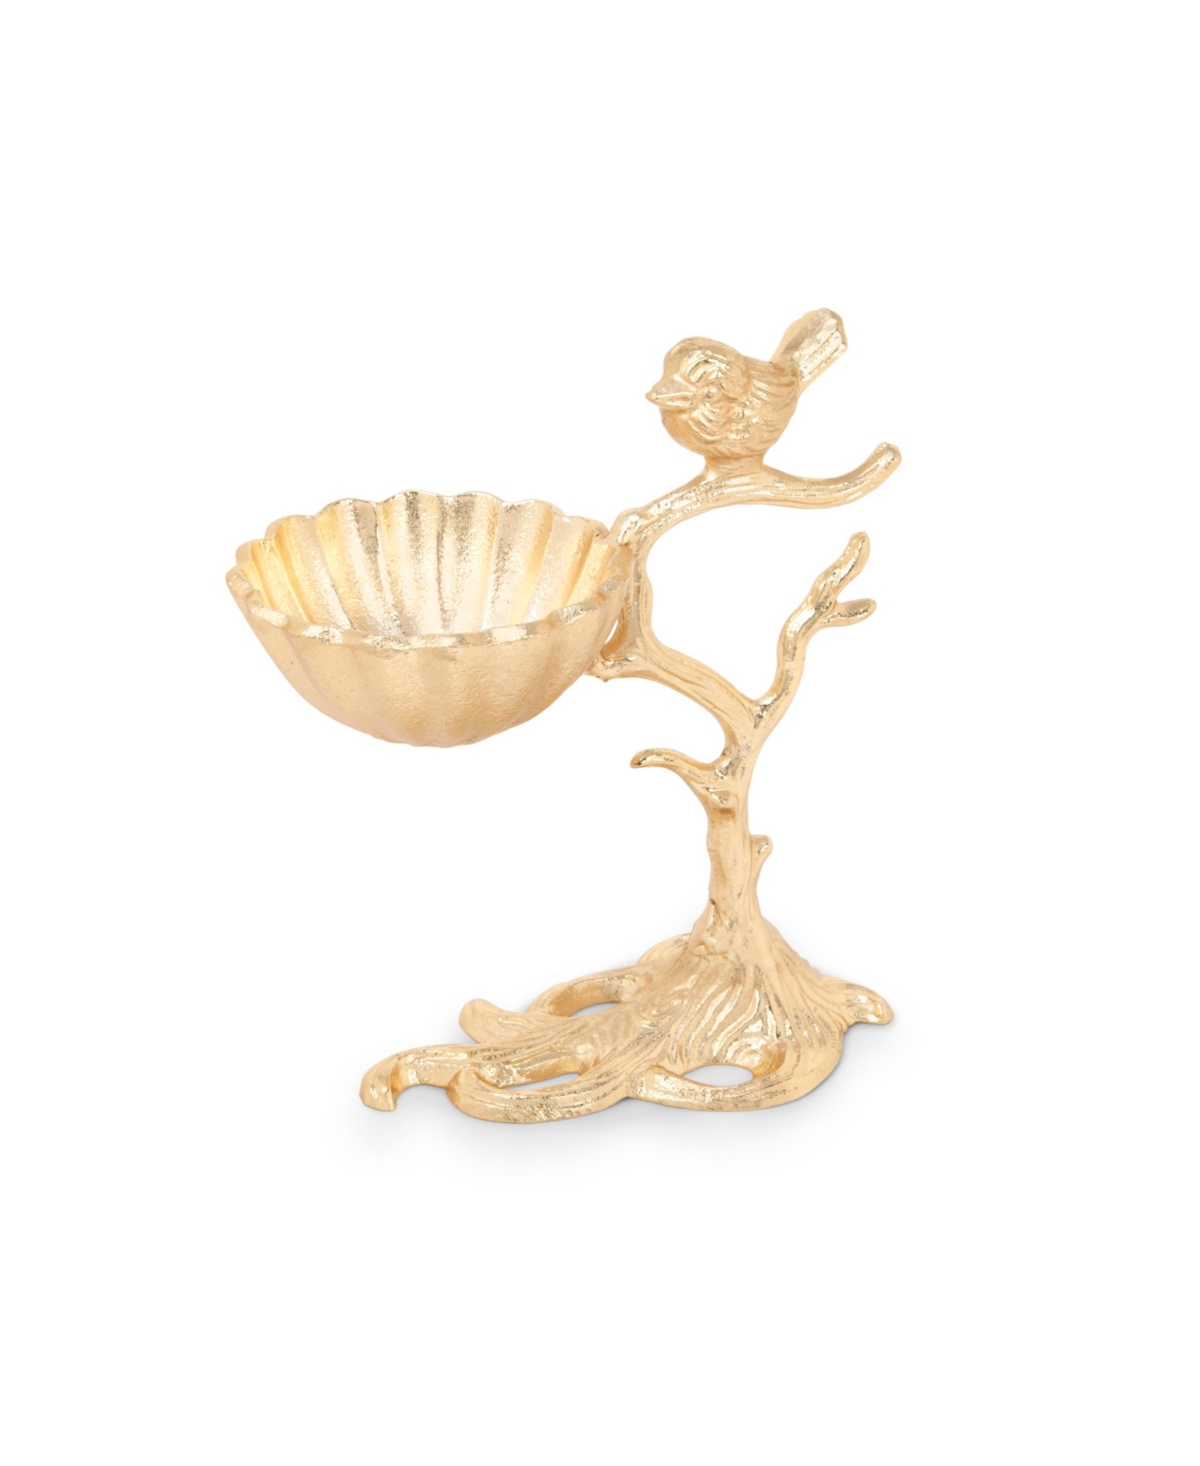 7"L Gold Centerpiece Bowl on Branch Base with Bird - Gold